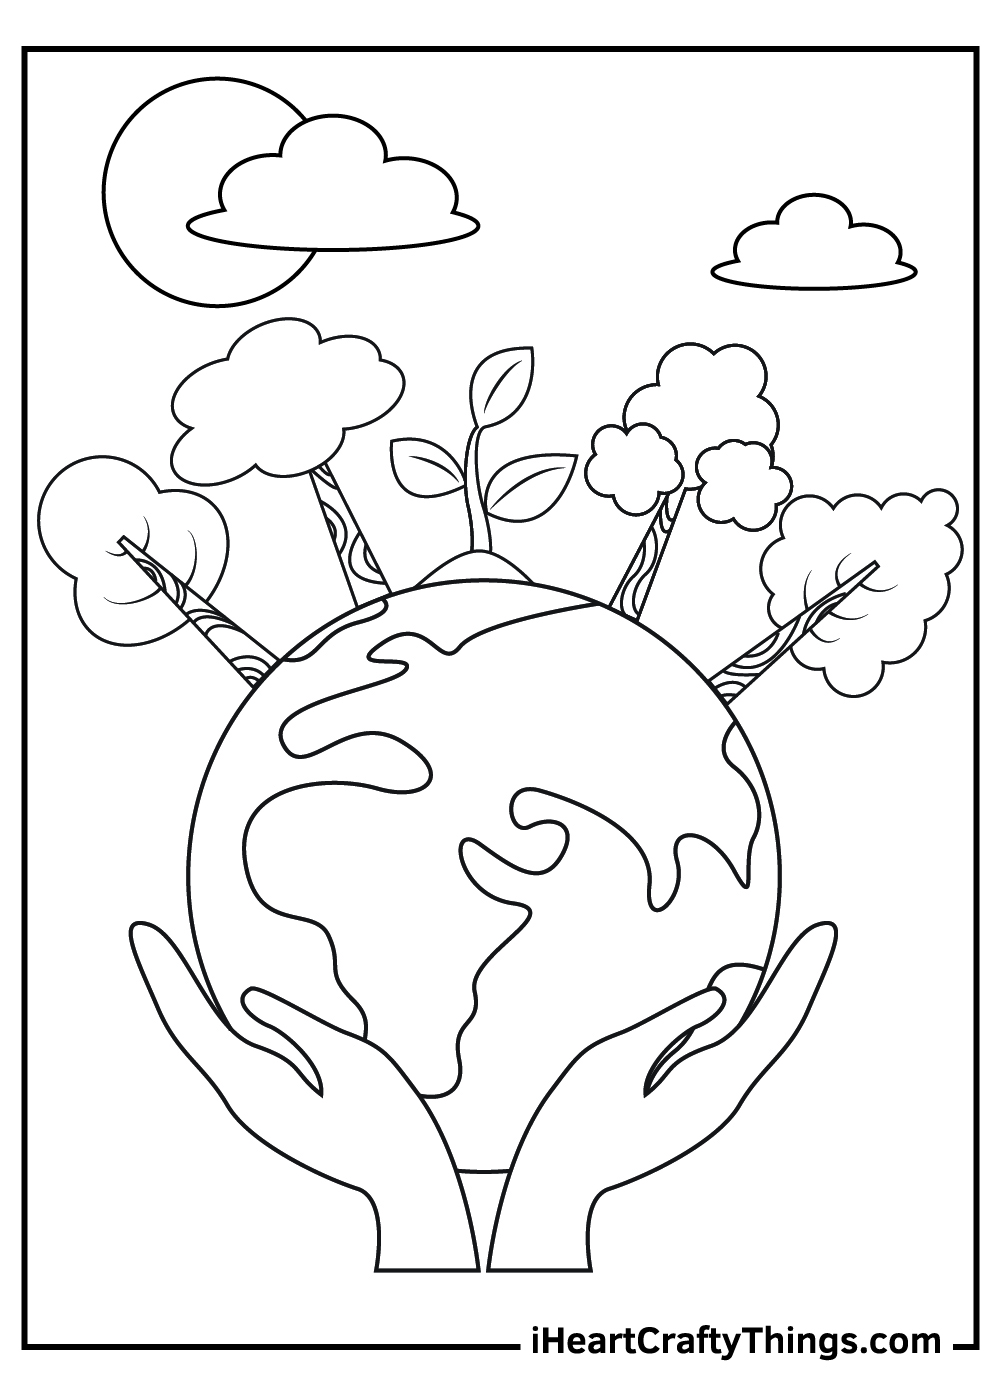 Earth Day Coloring Pages Updated 20